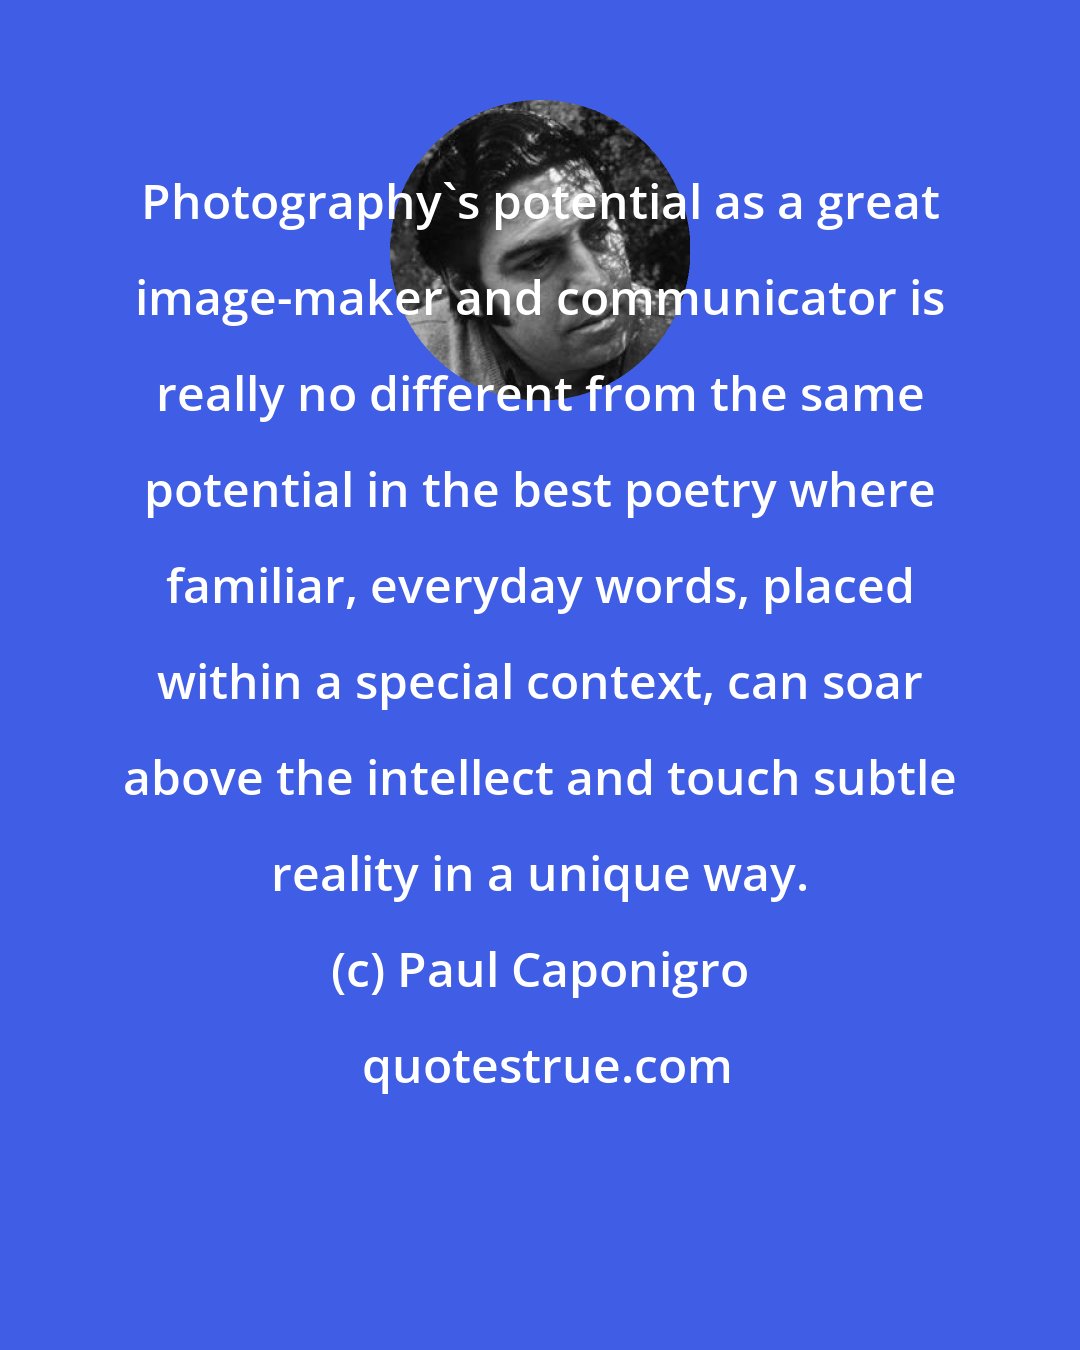 Paul Caponigro: Photography's potential as a great image-maker and communicator is really no different from the same potential in the best poetry where familiar, everyday words, placed within a special context, can soar above the intellect and touch subtle reality in a unique way.